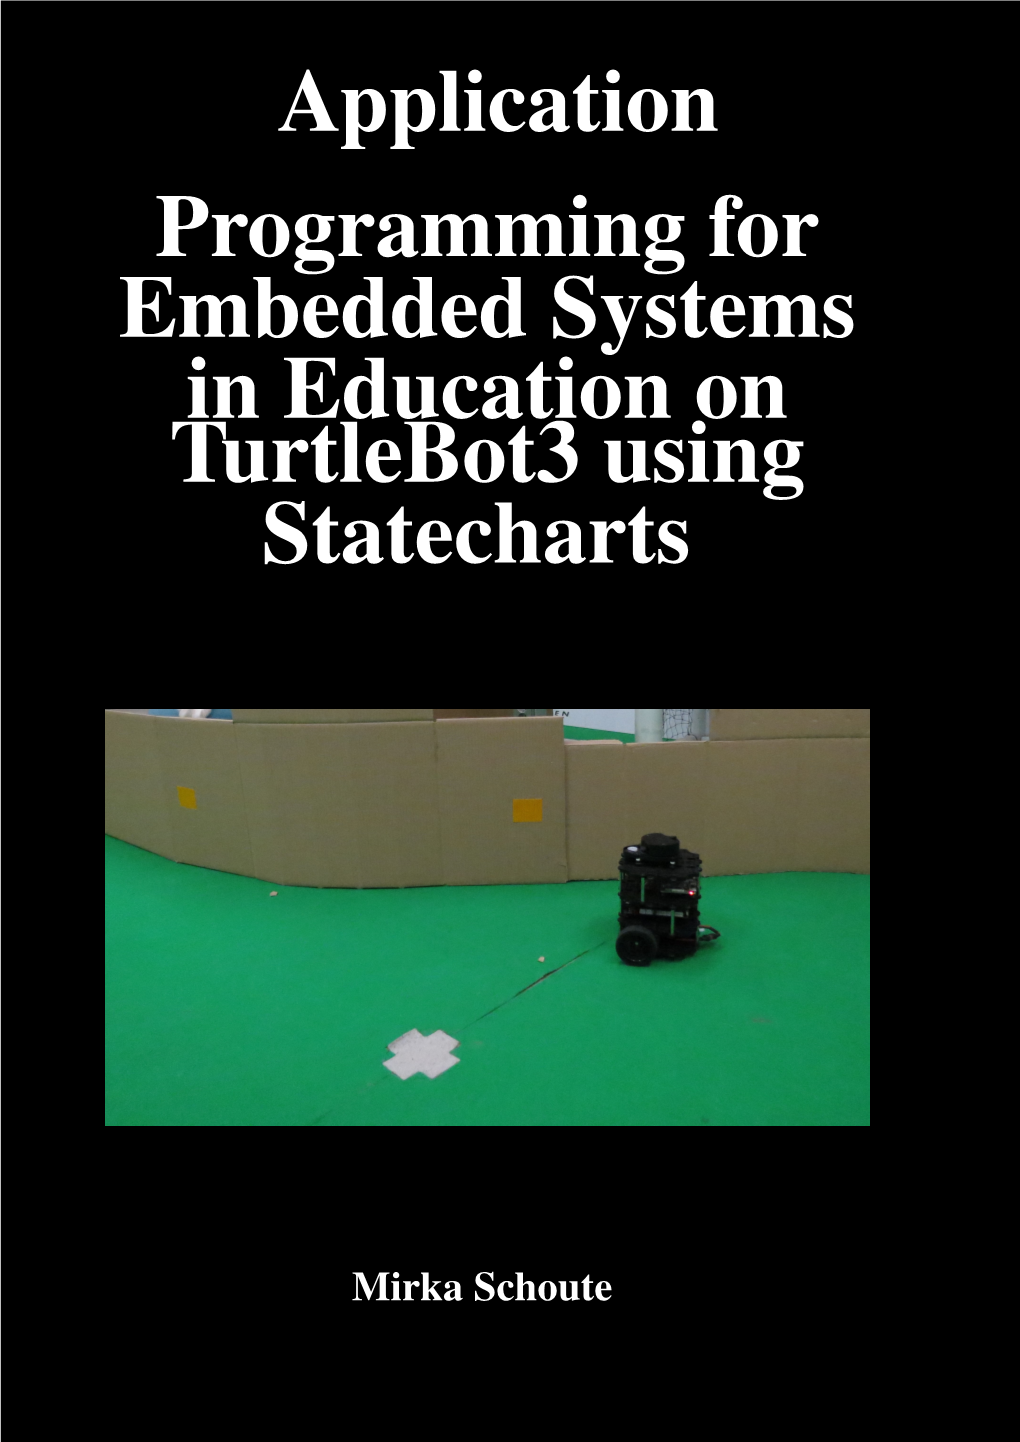 Application Programming for Embedded Systems in Education on Turtlebot3 Using Statecharts